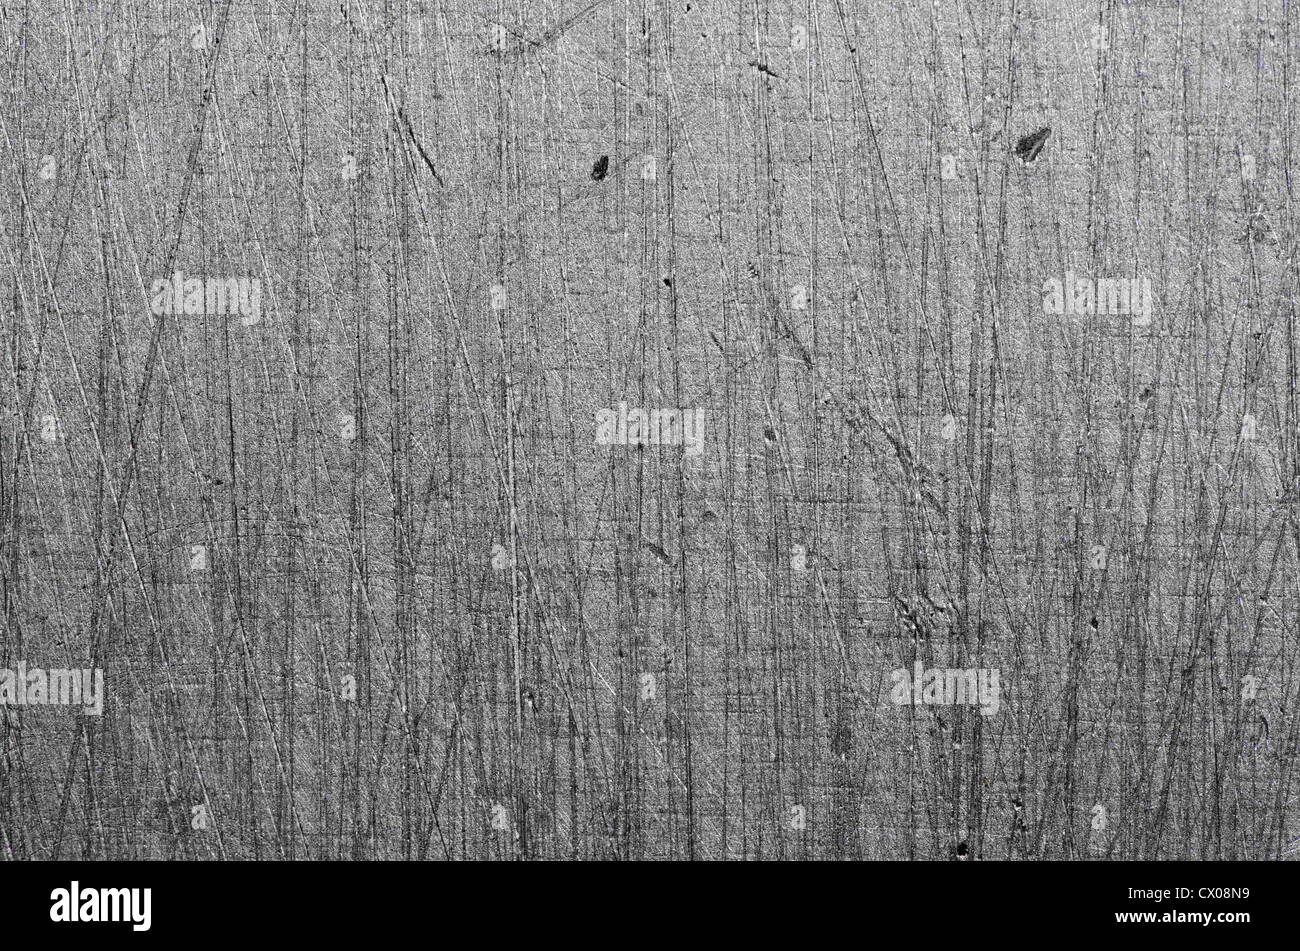 old grunge metal plate steel background Stock Photo